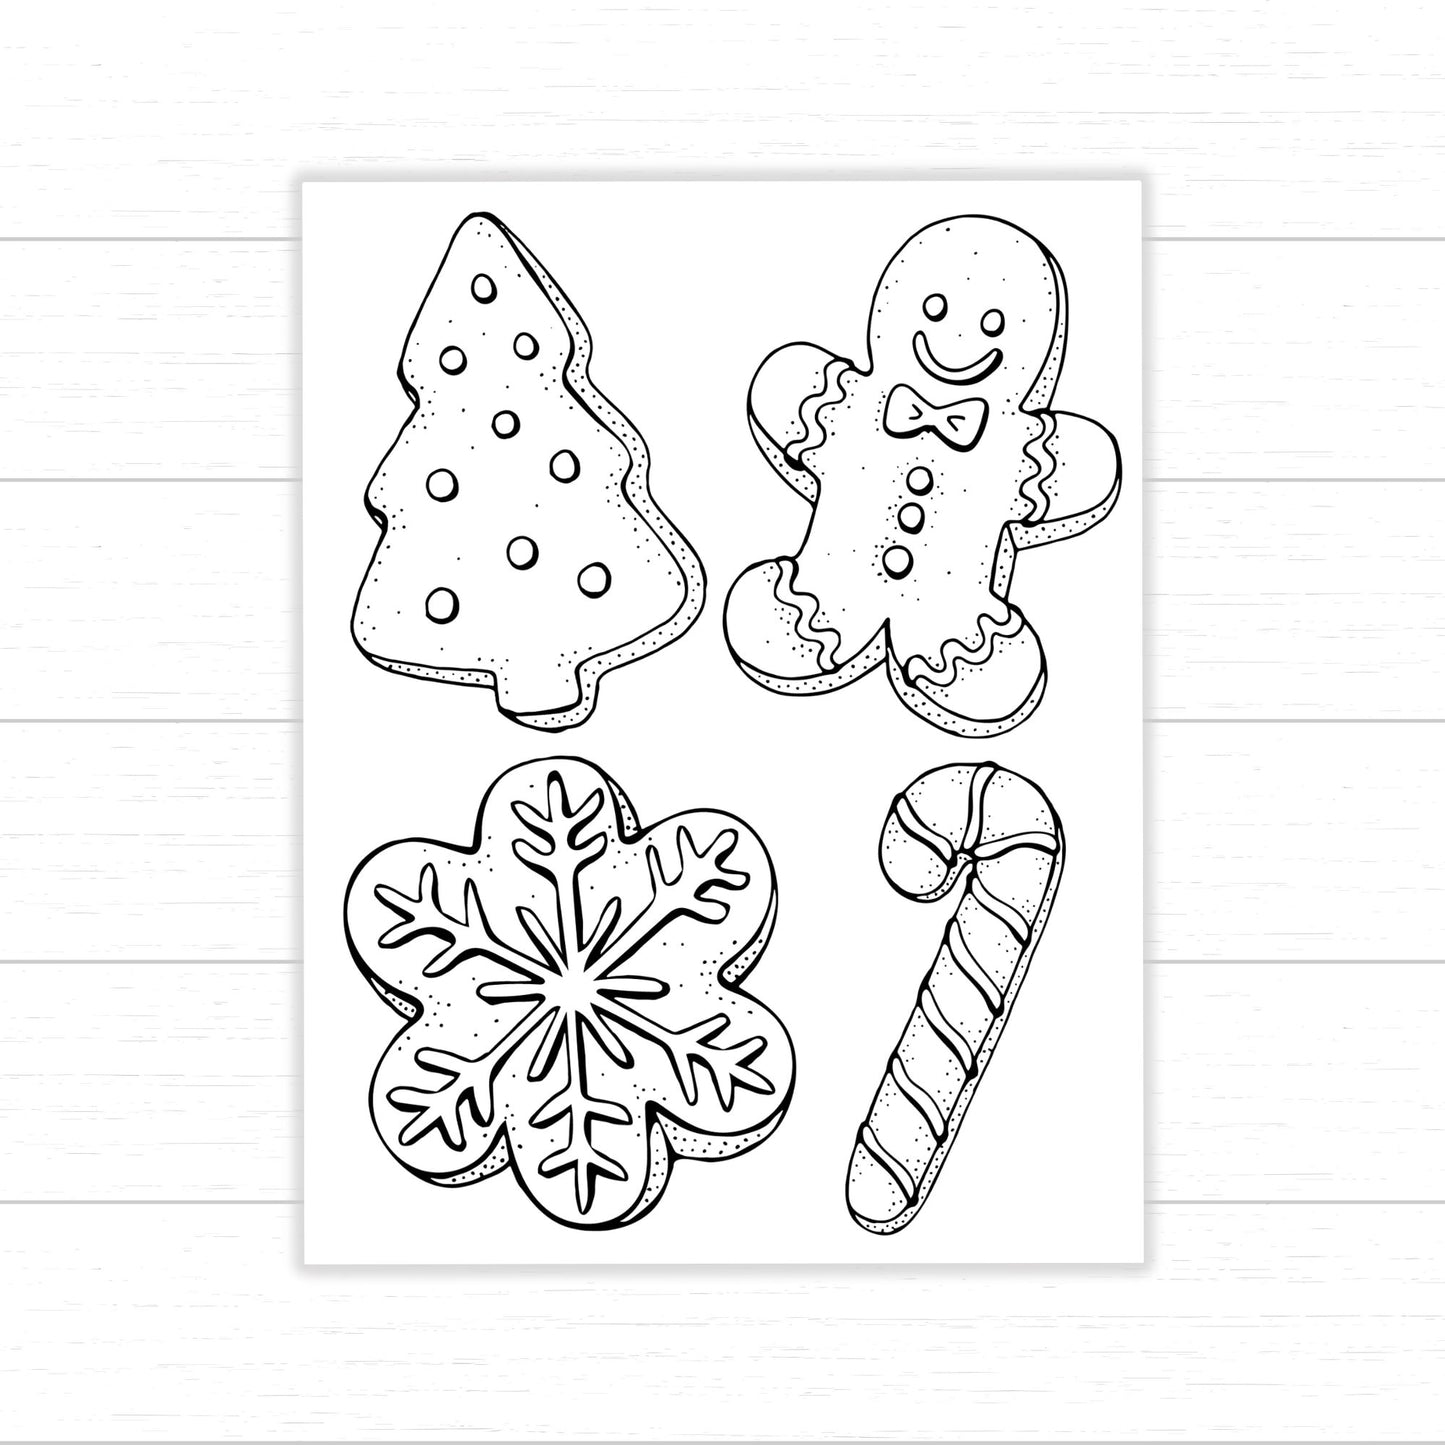 Christmas Cookie Coloring Pages, Christmas Coloring Pages for Kids, Christmas Cookie Activities, Printable Christmas Cookies